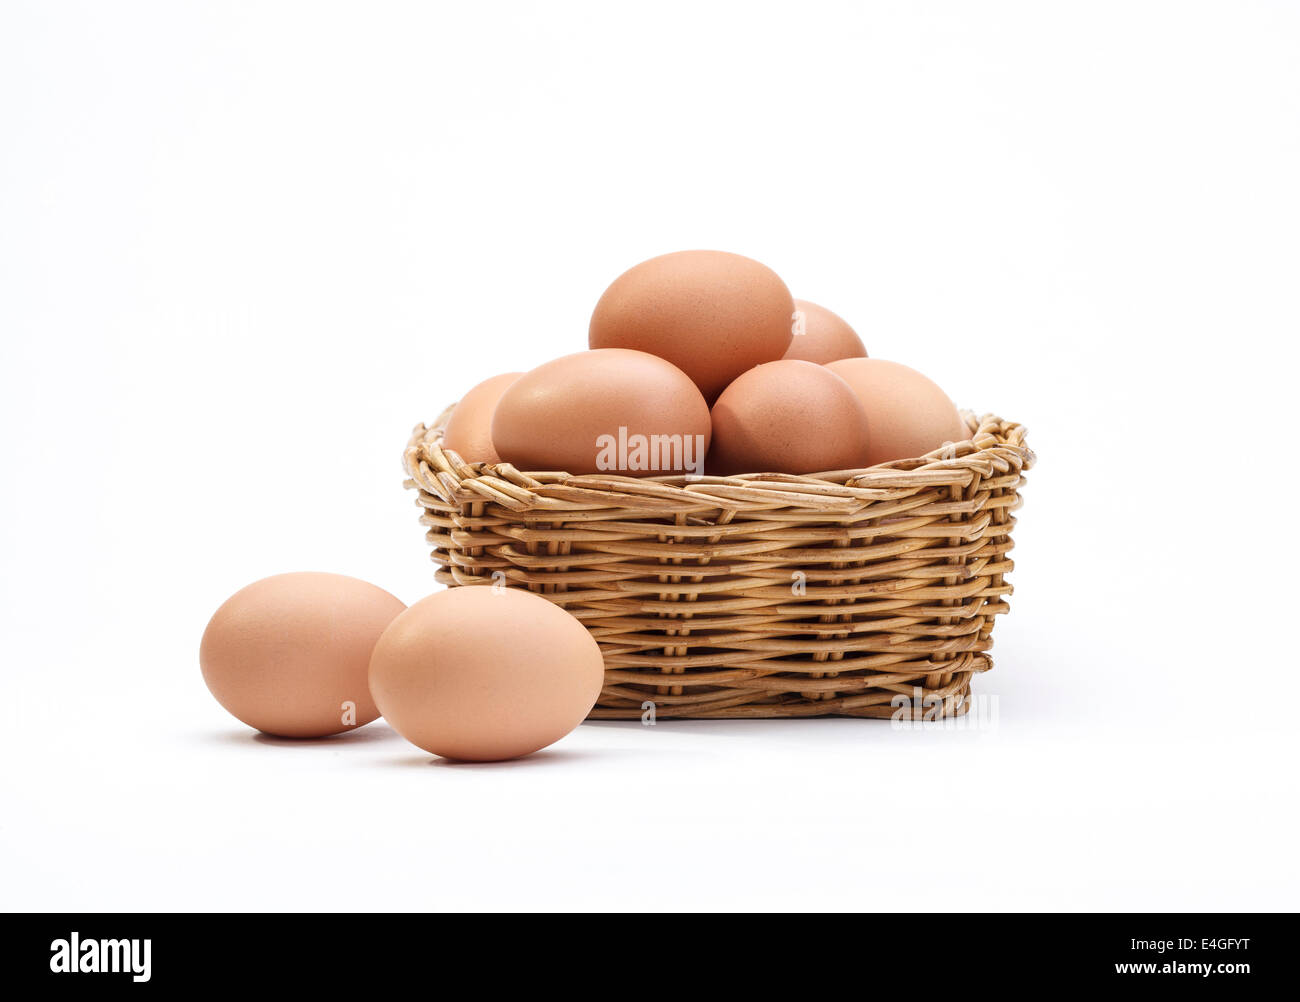 Eggs in rattan basket a healthy food gift isolated on white Stock Photo